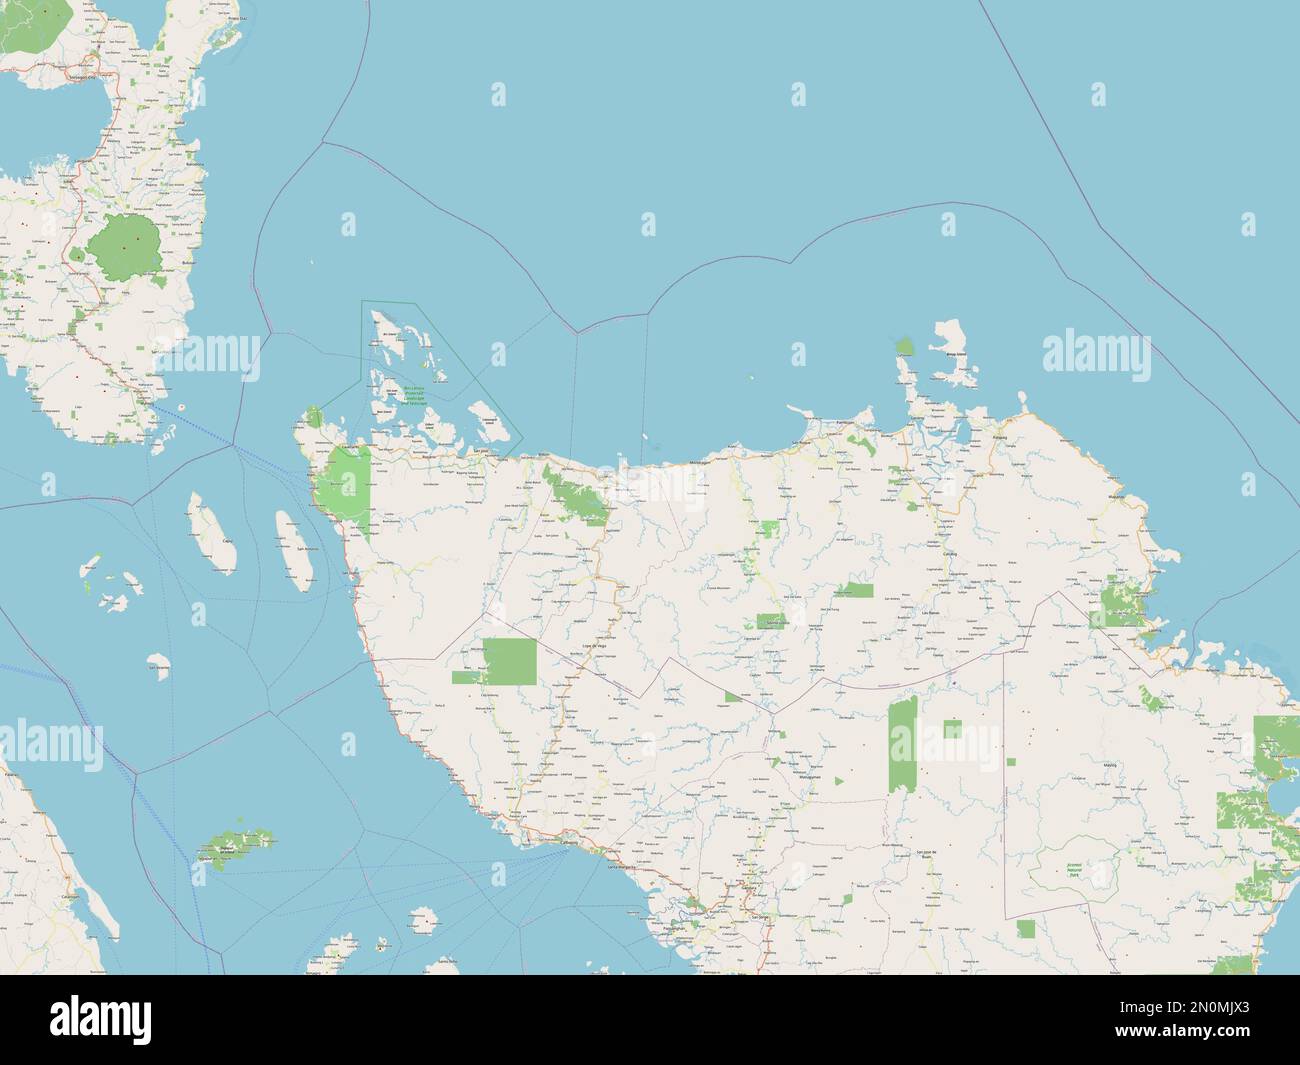 Northern Samar, province of Philippines. Open Street Map Stock Photo